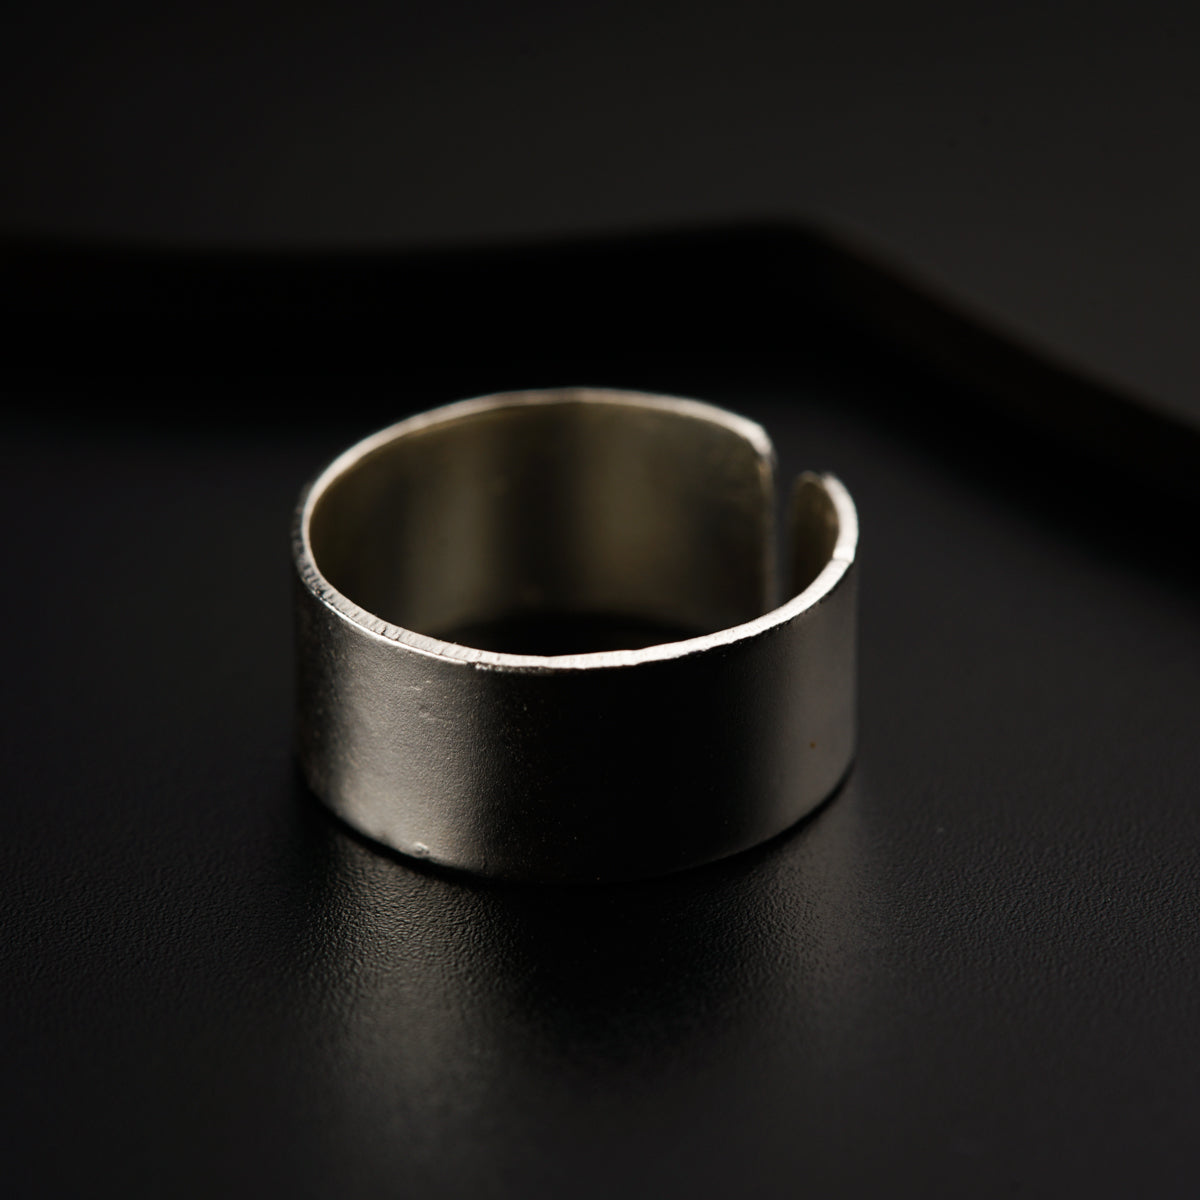 Wedding Ring Bands - My Personal Jewellery